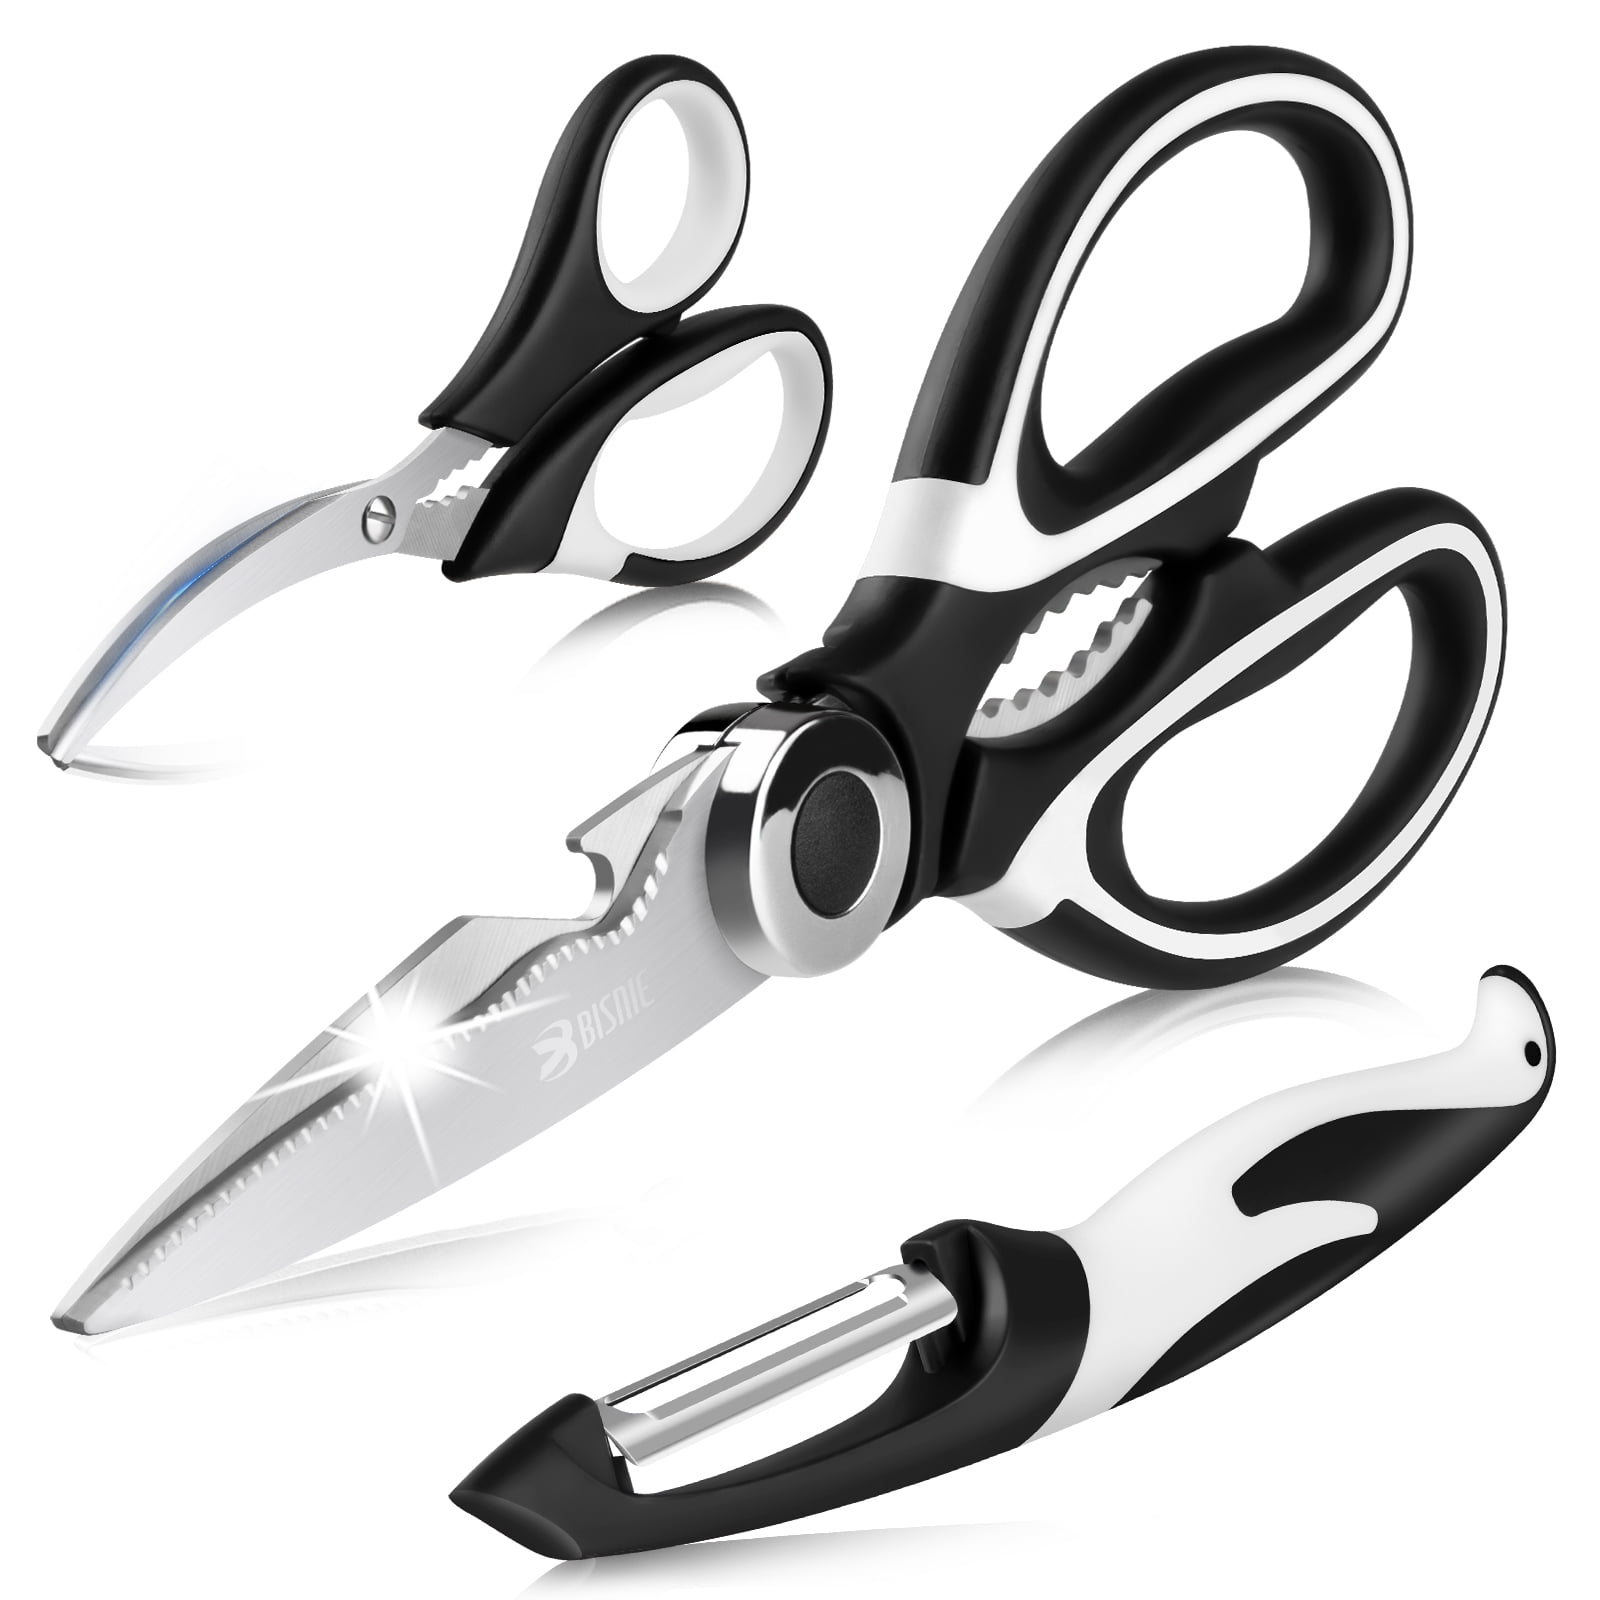 3pcs Stainless Steel Kitchen Scissors Set, Multifunctional Poultry